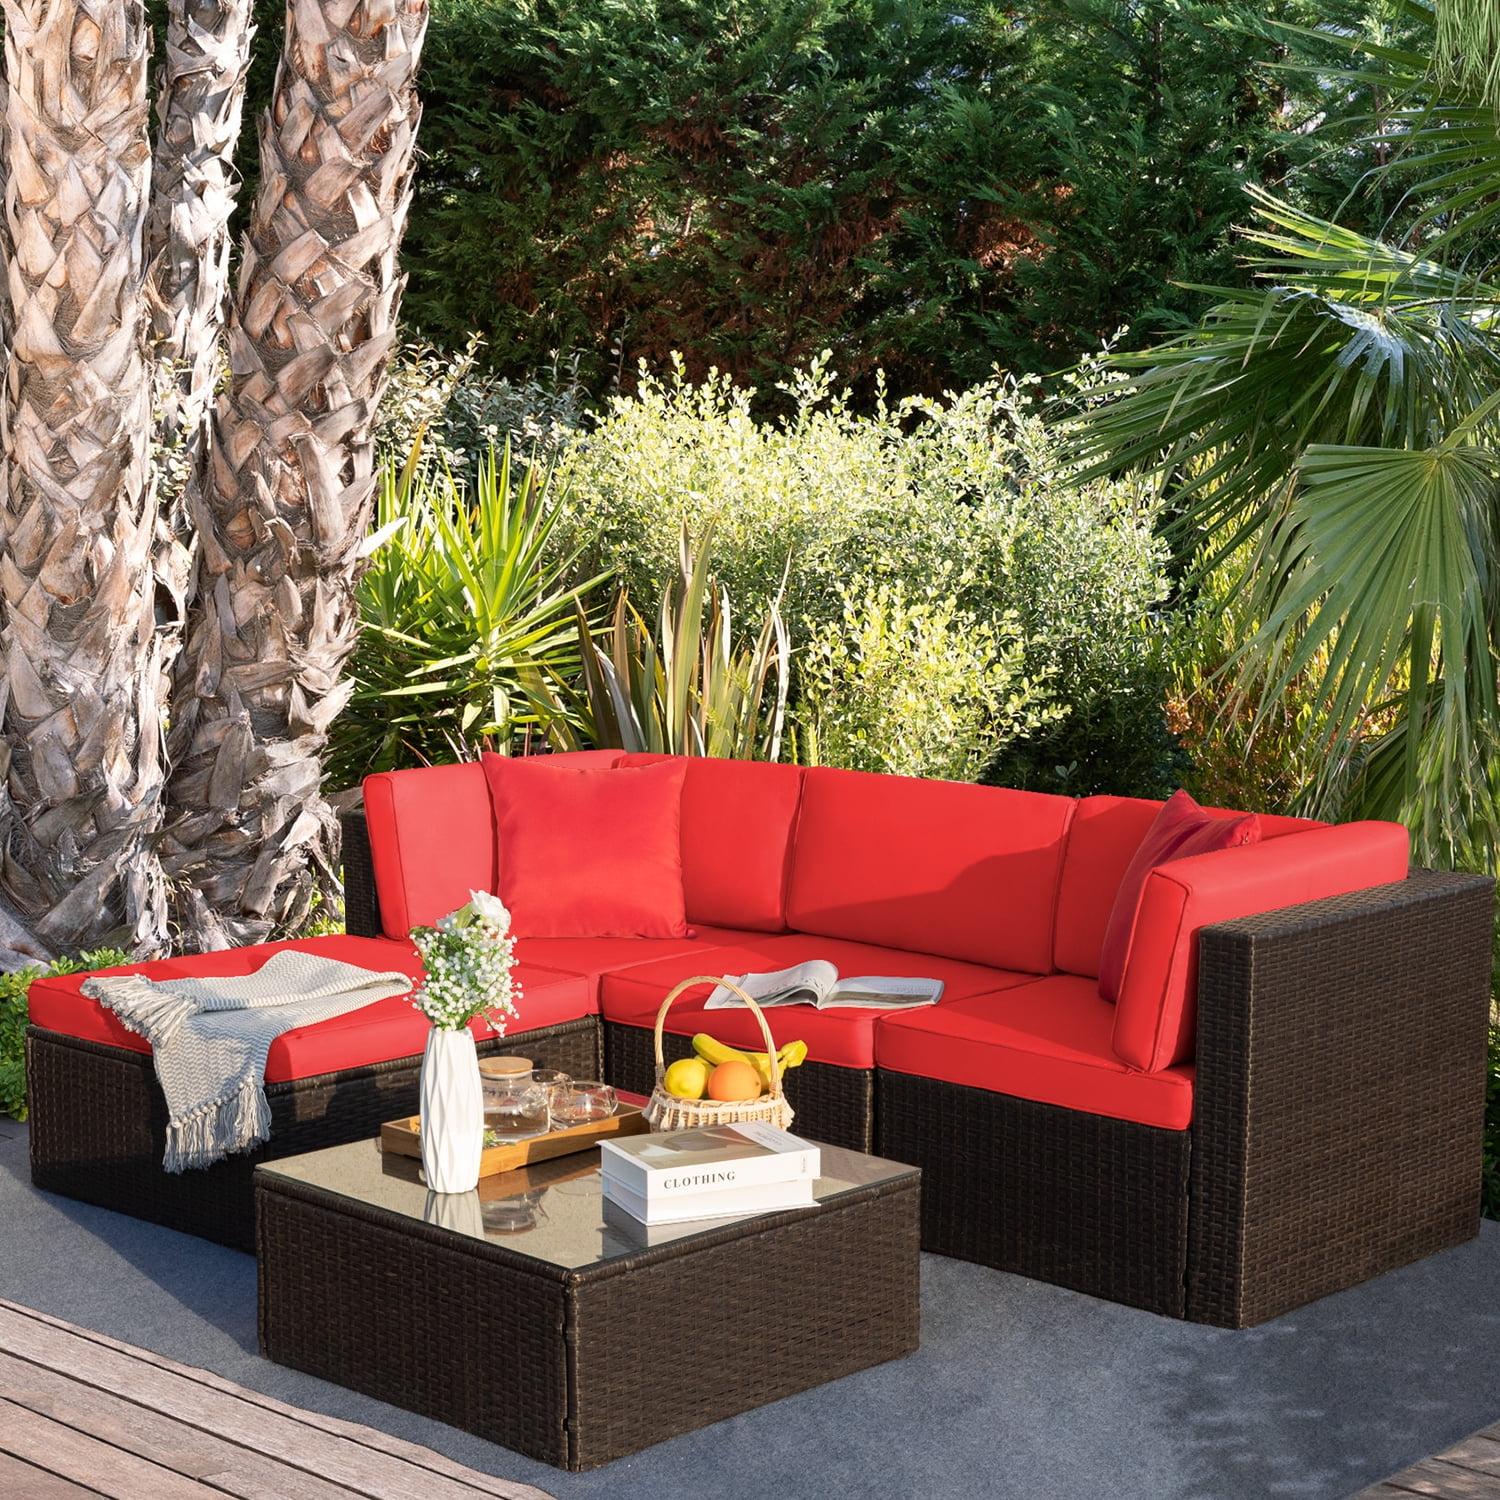 LEMBERI 5 Pieces Outdoor Furniture Patio Conversation Sets All Weather Wicker Sectional Sofa Couch Lawn Sectional Furniture with Washable Couch Cushions and Glass Table RED 